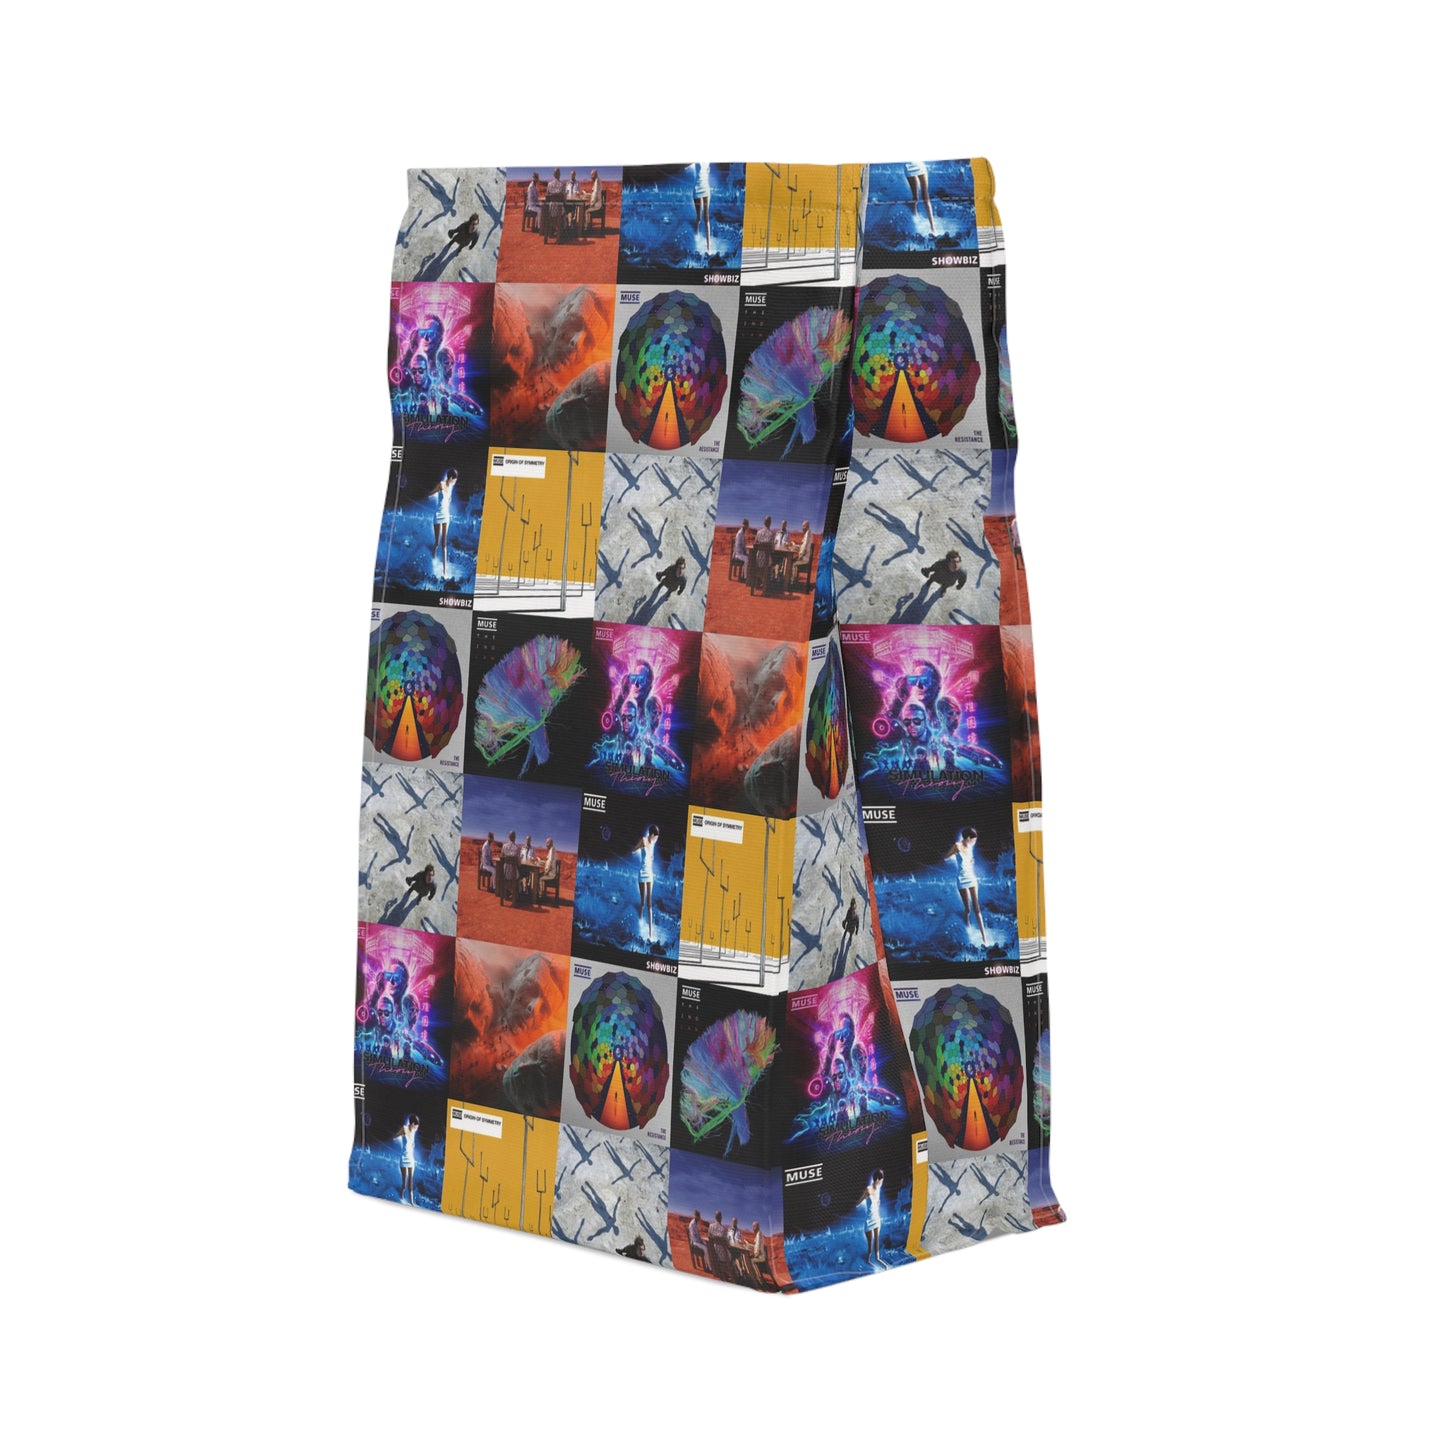 Muse Album Cover Collage Polyester Lunch Bag